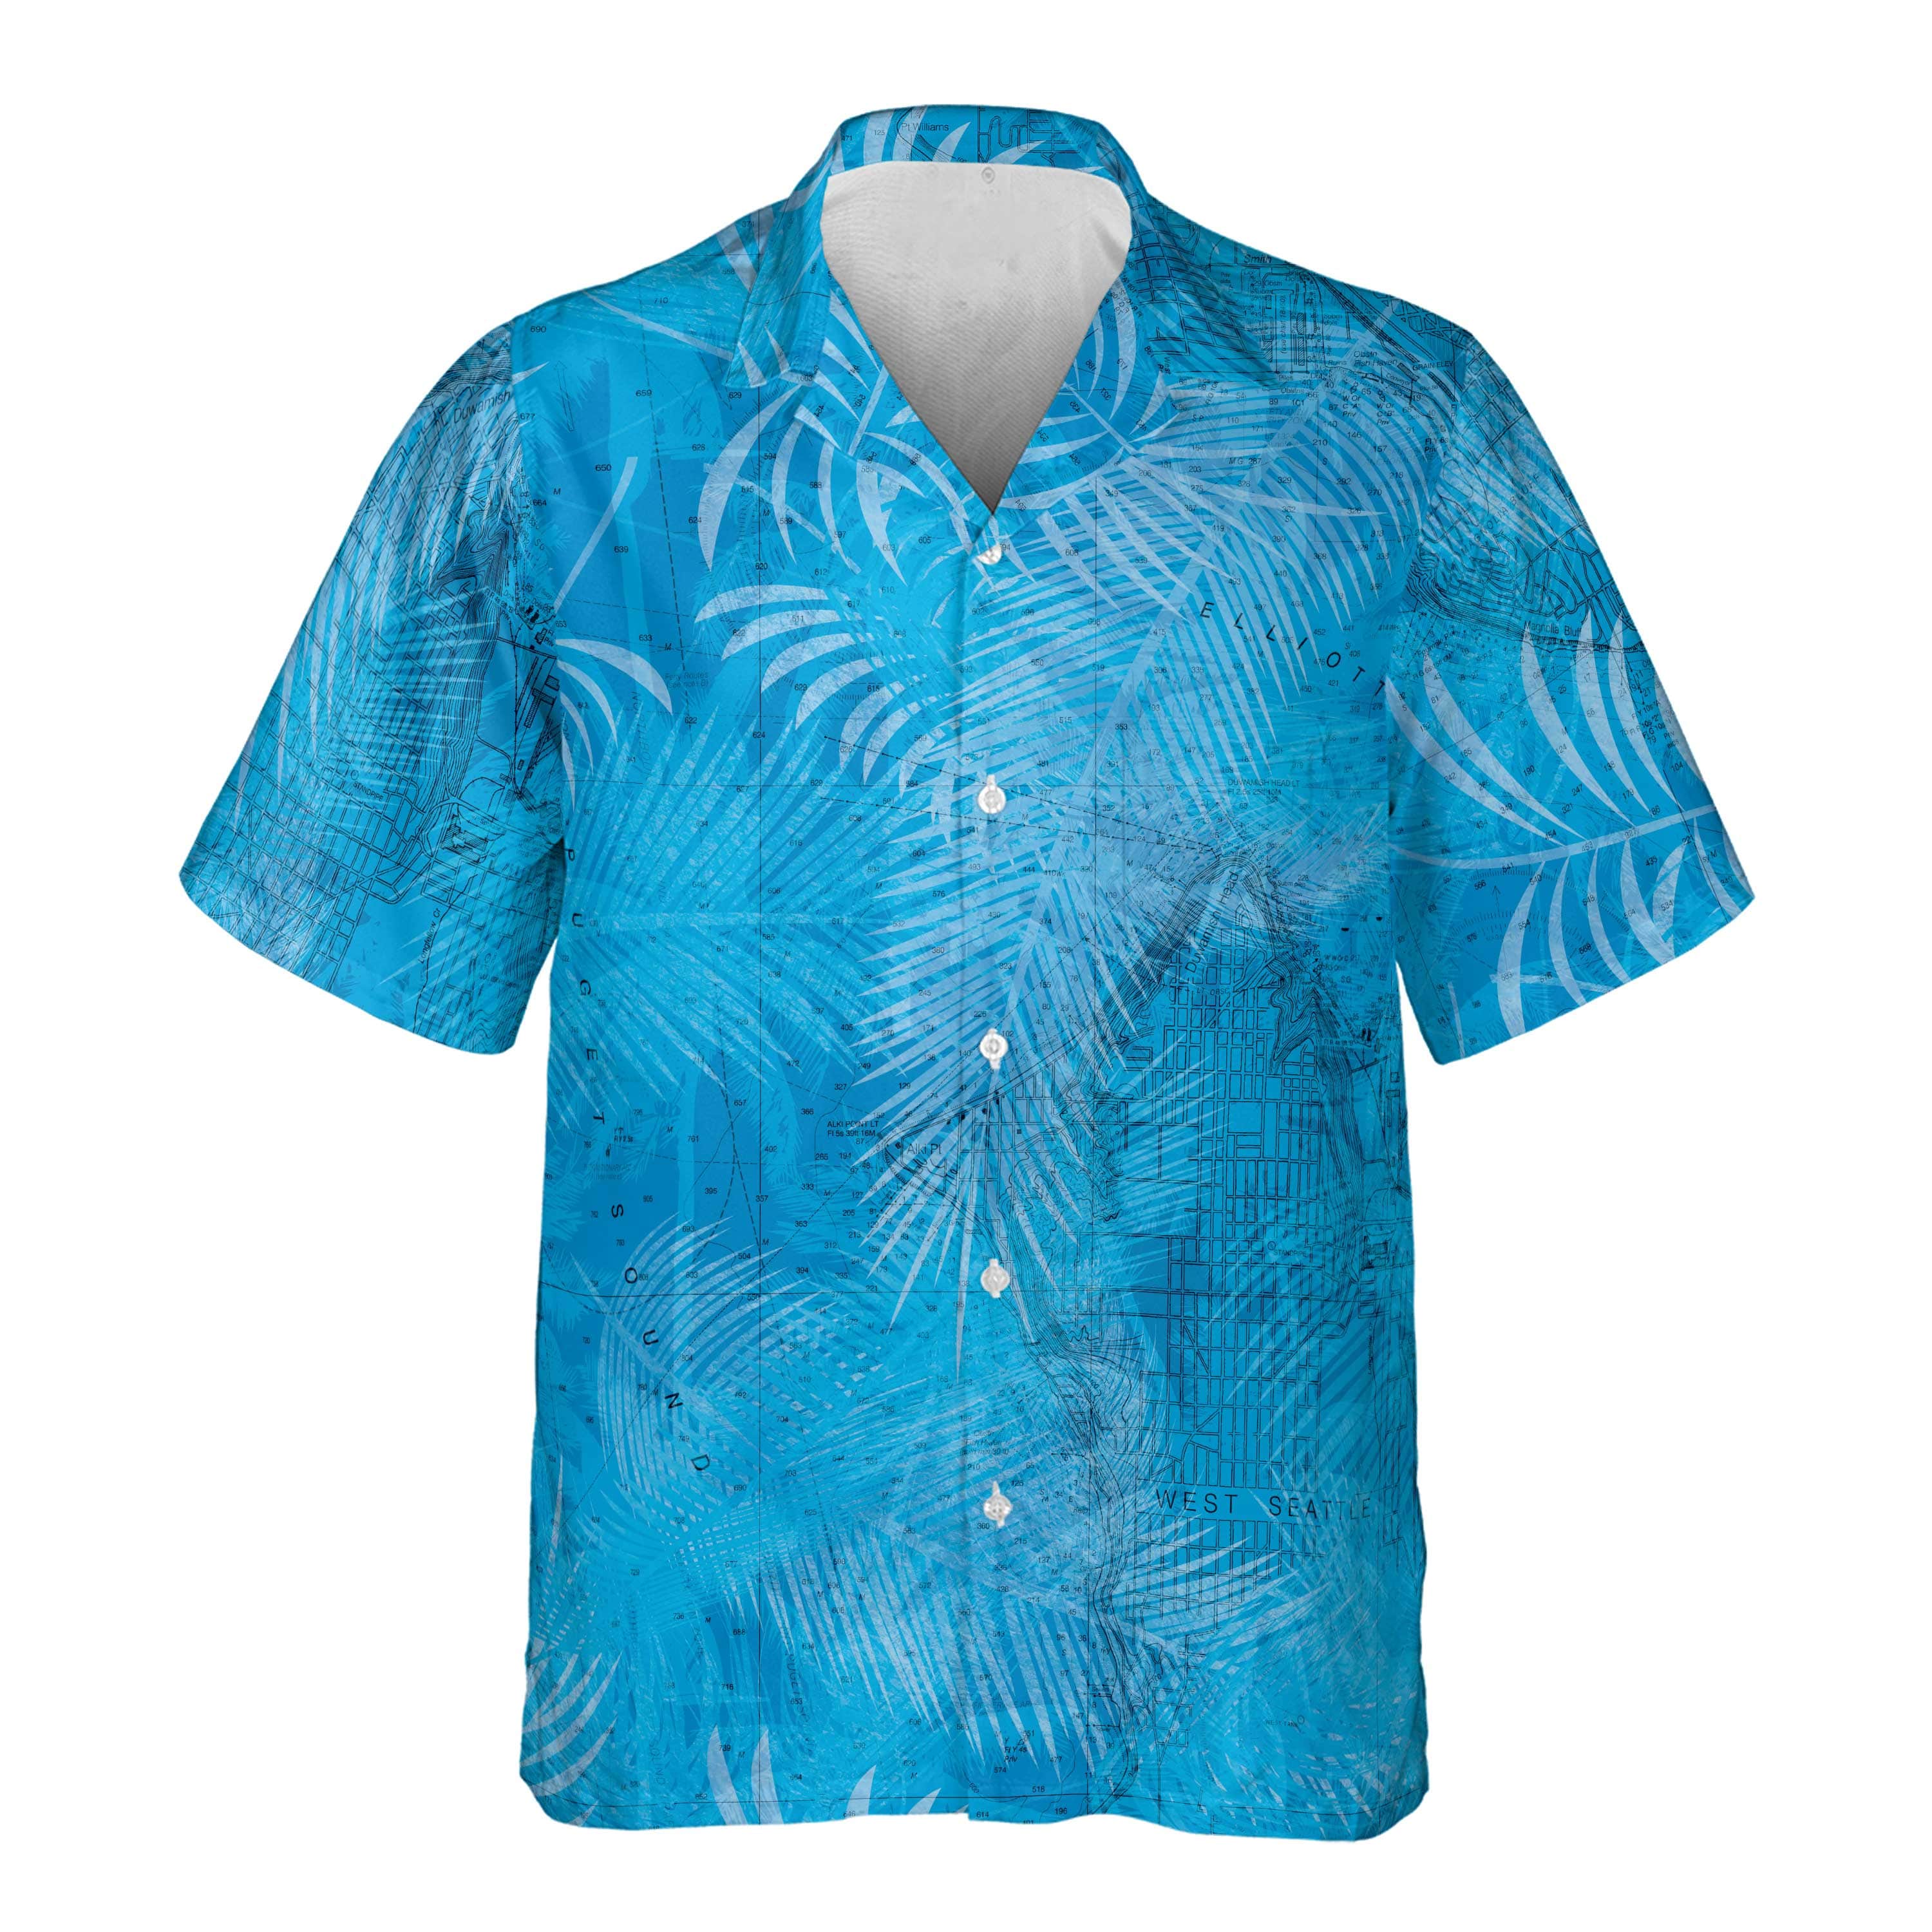 The Puget Sound and Seattle Blue Flowers Pocket Shirt